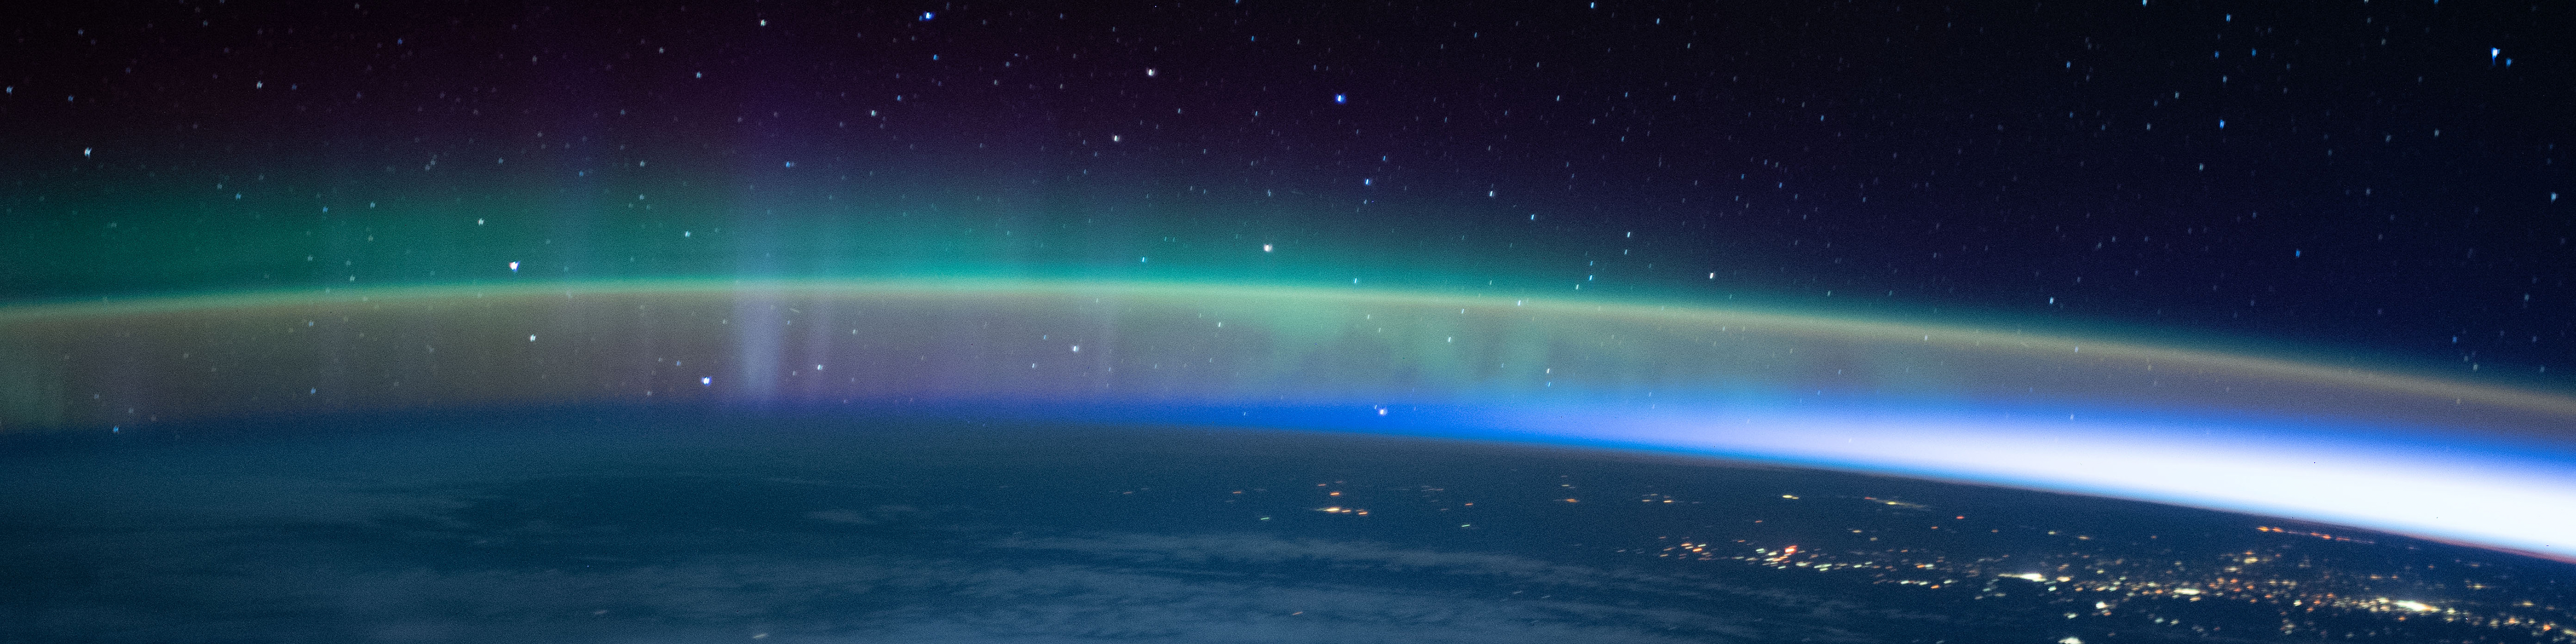 In this image taken on Oct. 30, 2021, an aurora dimly intersected with Earth's airglow as the International Space Station flew into an orbital sunrise 264 miles above the Pacific Ocean before crossing over Canada.